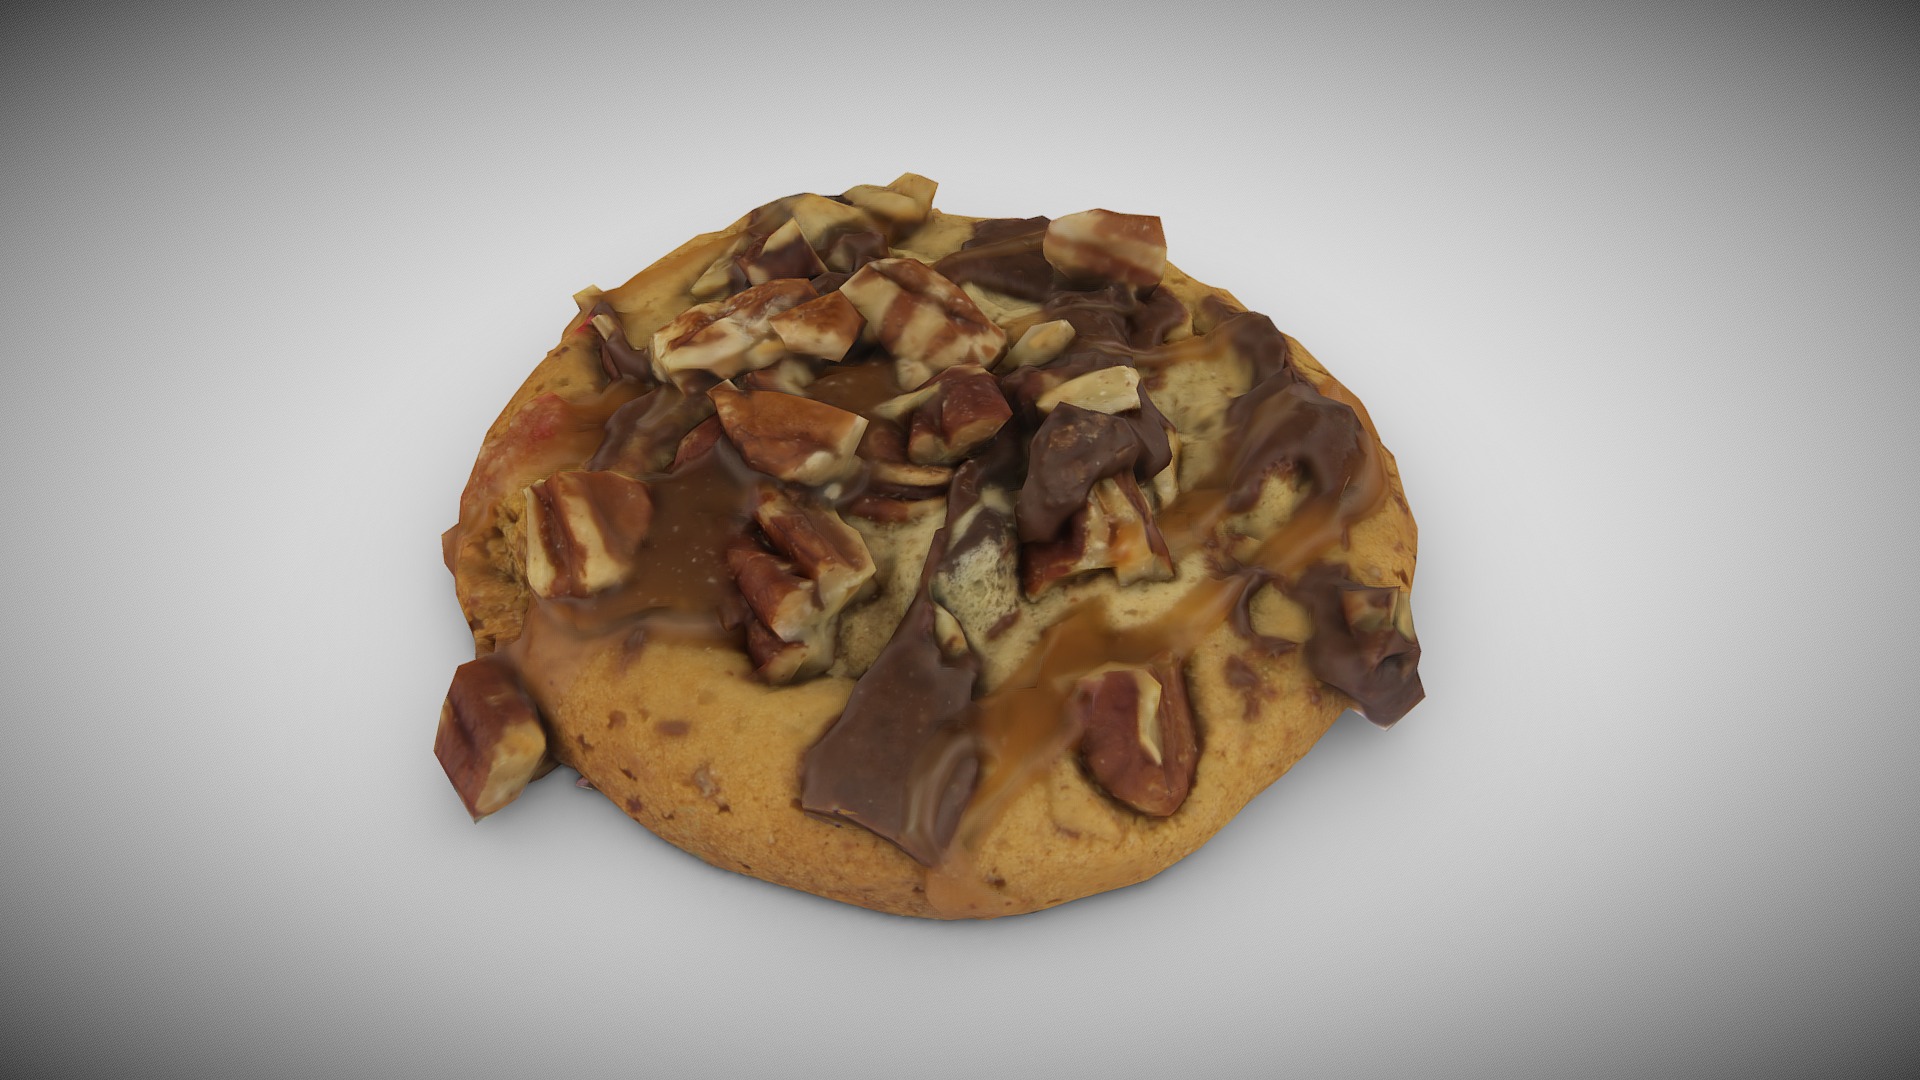 3D model Turtle Cookie Photogrammetry v2 - This is a 3D model of the Turtle Cookie Photogrammetry v2. The 3D model is about a waffle with chocolate and nuts.